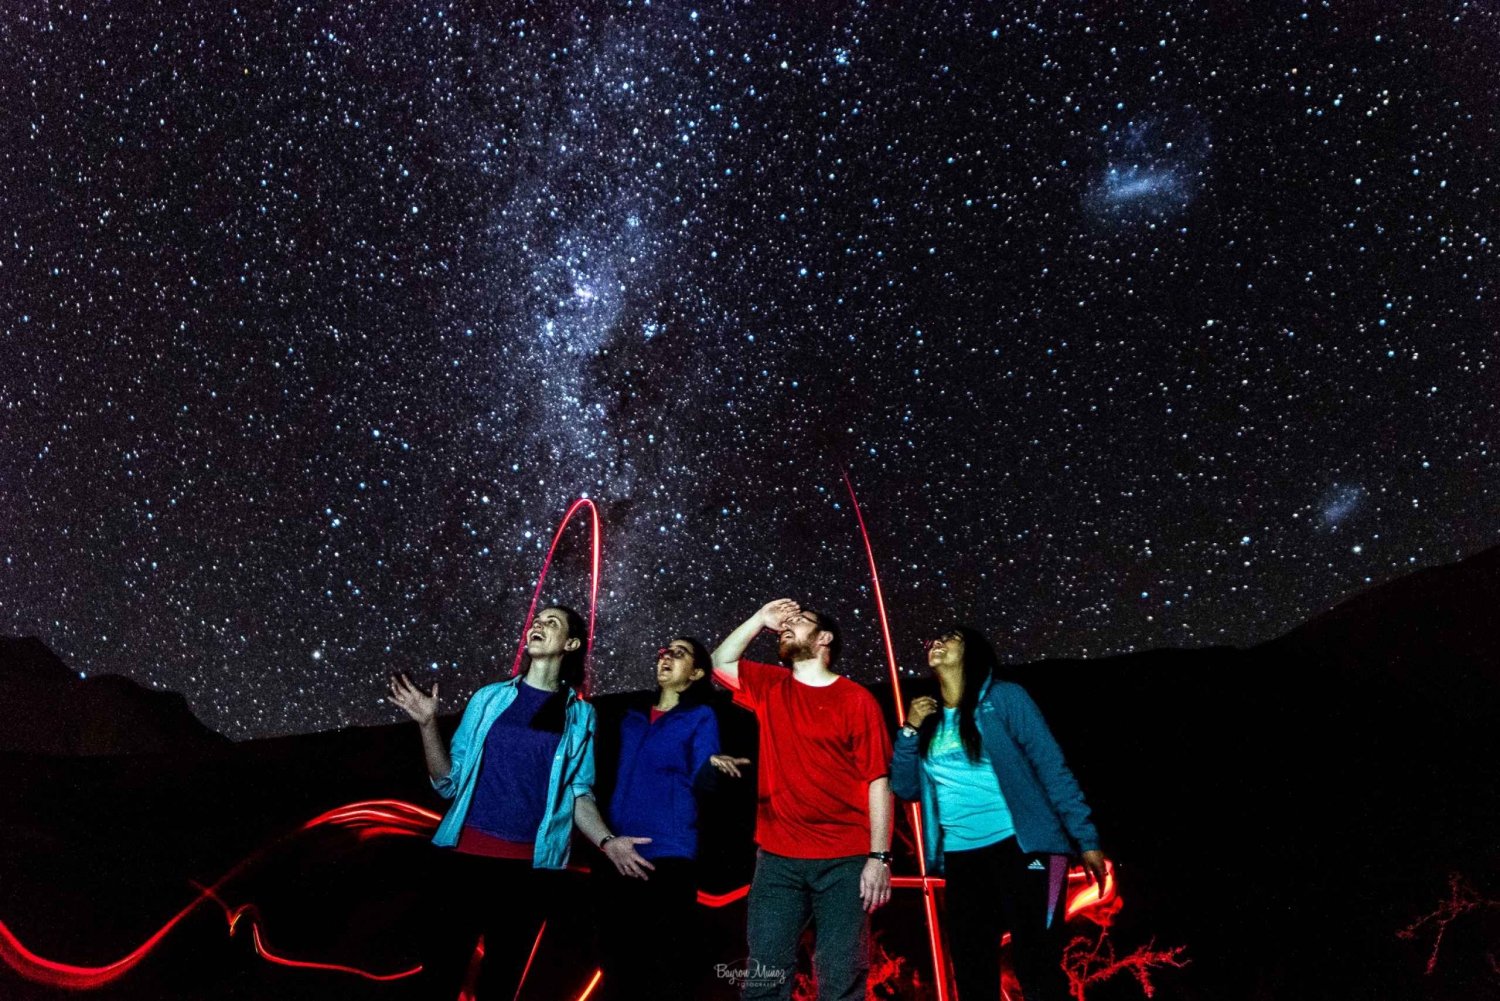 Pisco Elqui: Mountaintop Stargazing and Night Portrait: Mountaintop Stargazing and Night Portrait.